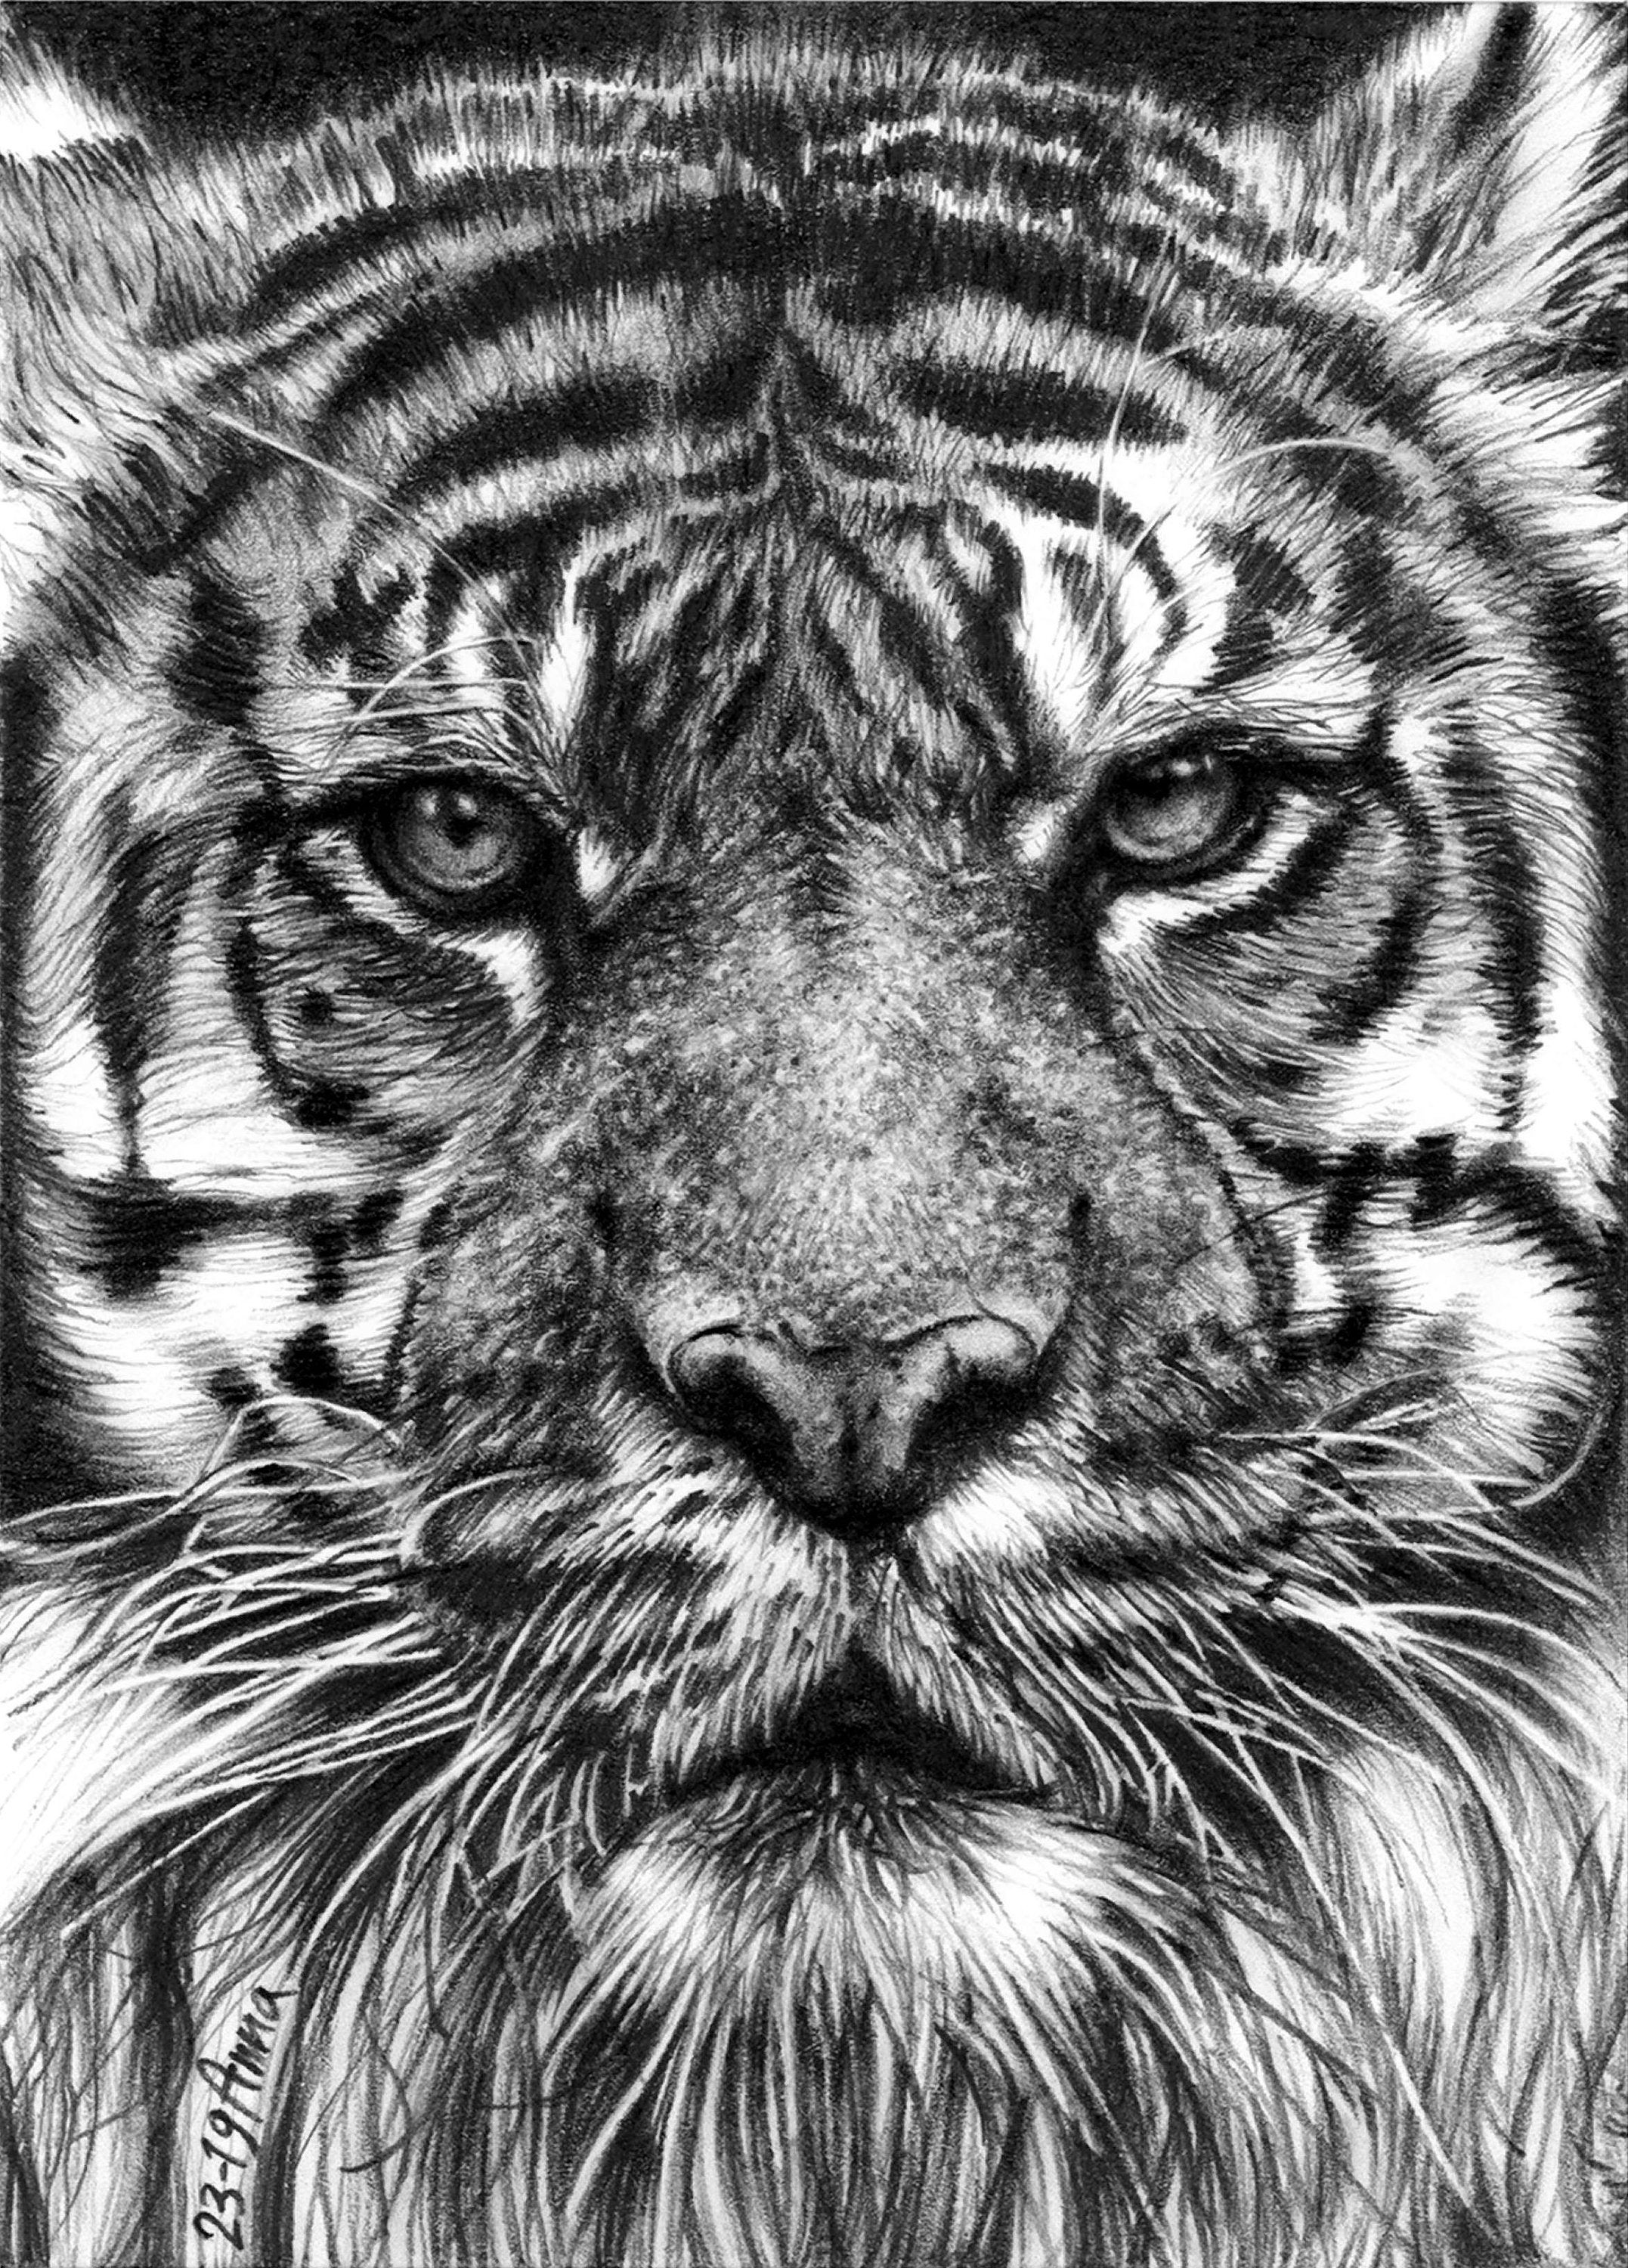 Buy Tiger Portrait Animals Photo Drawing Realistic Pencil Drawing Online in  India - Etsy